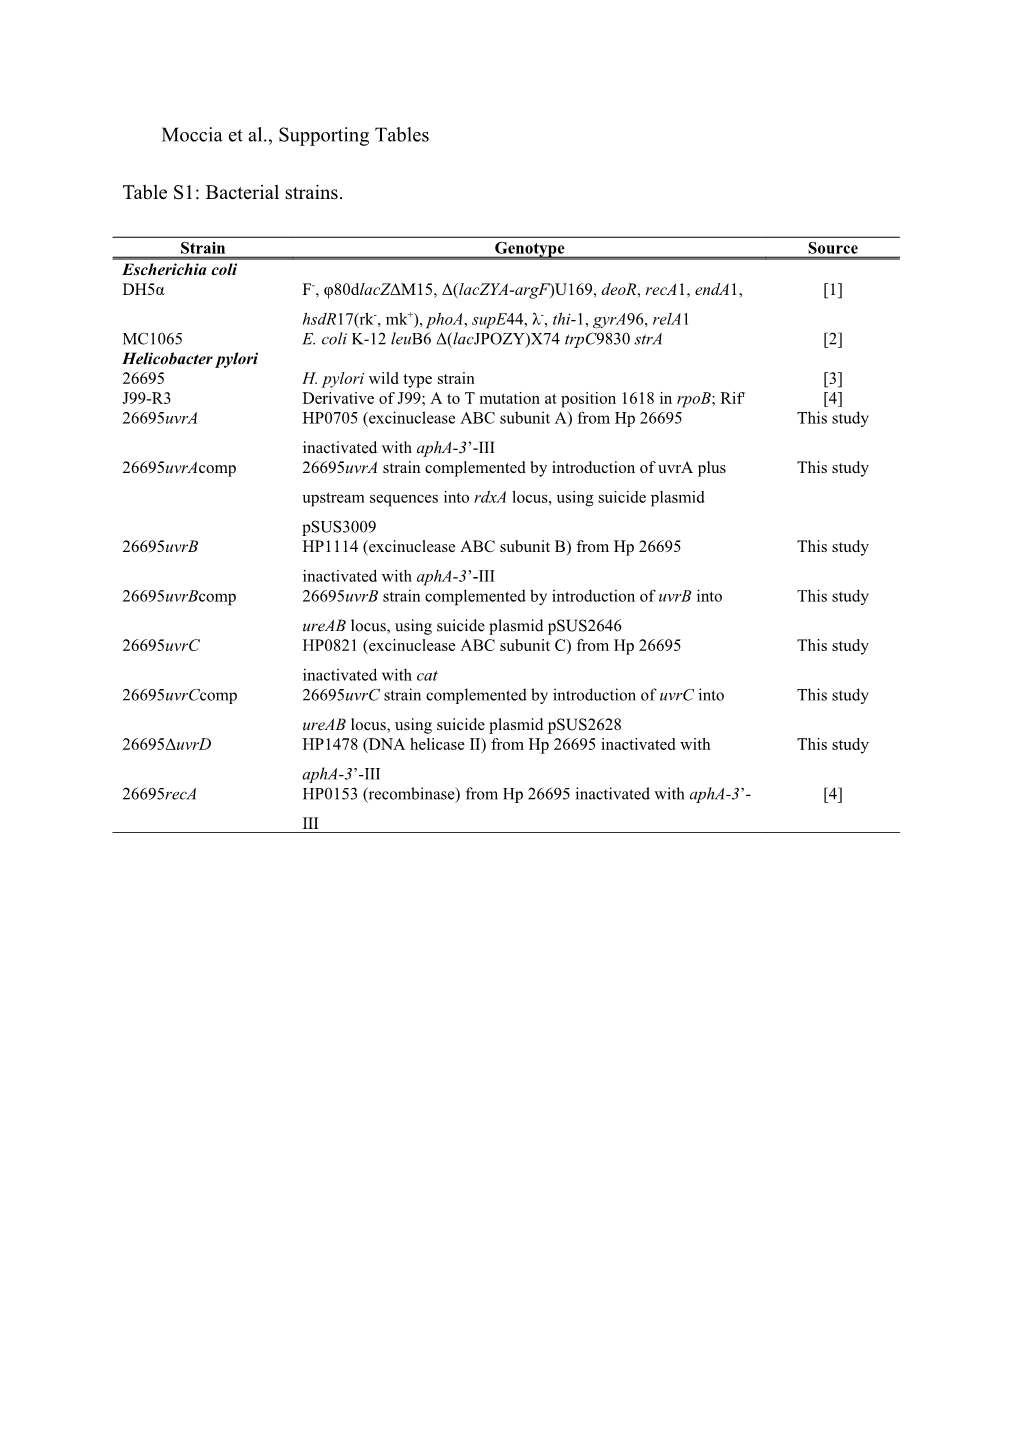 Table S2: Oligonucleotide Primers and PCR Products Used in This Study